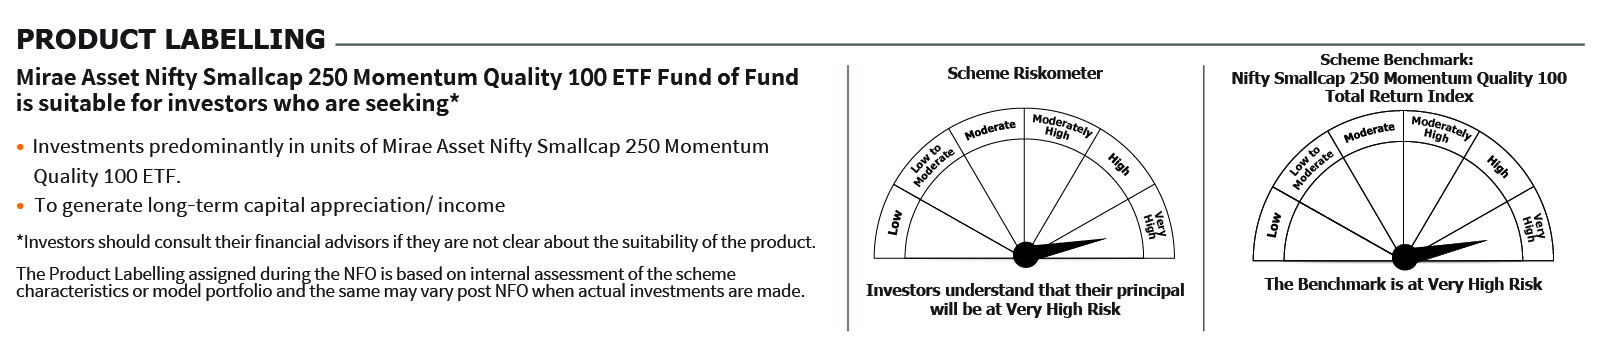 Mirae Asset Nifty Smallcap 250 Momentum Quality 100 ETF Fund of Fund